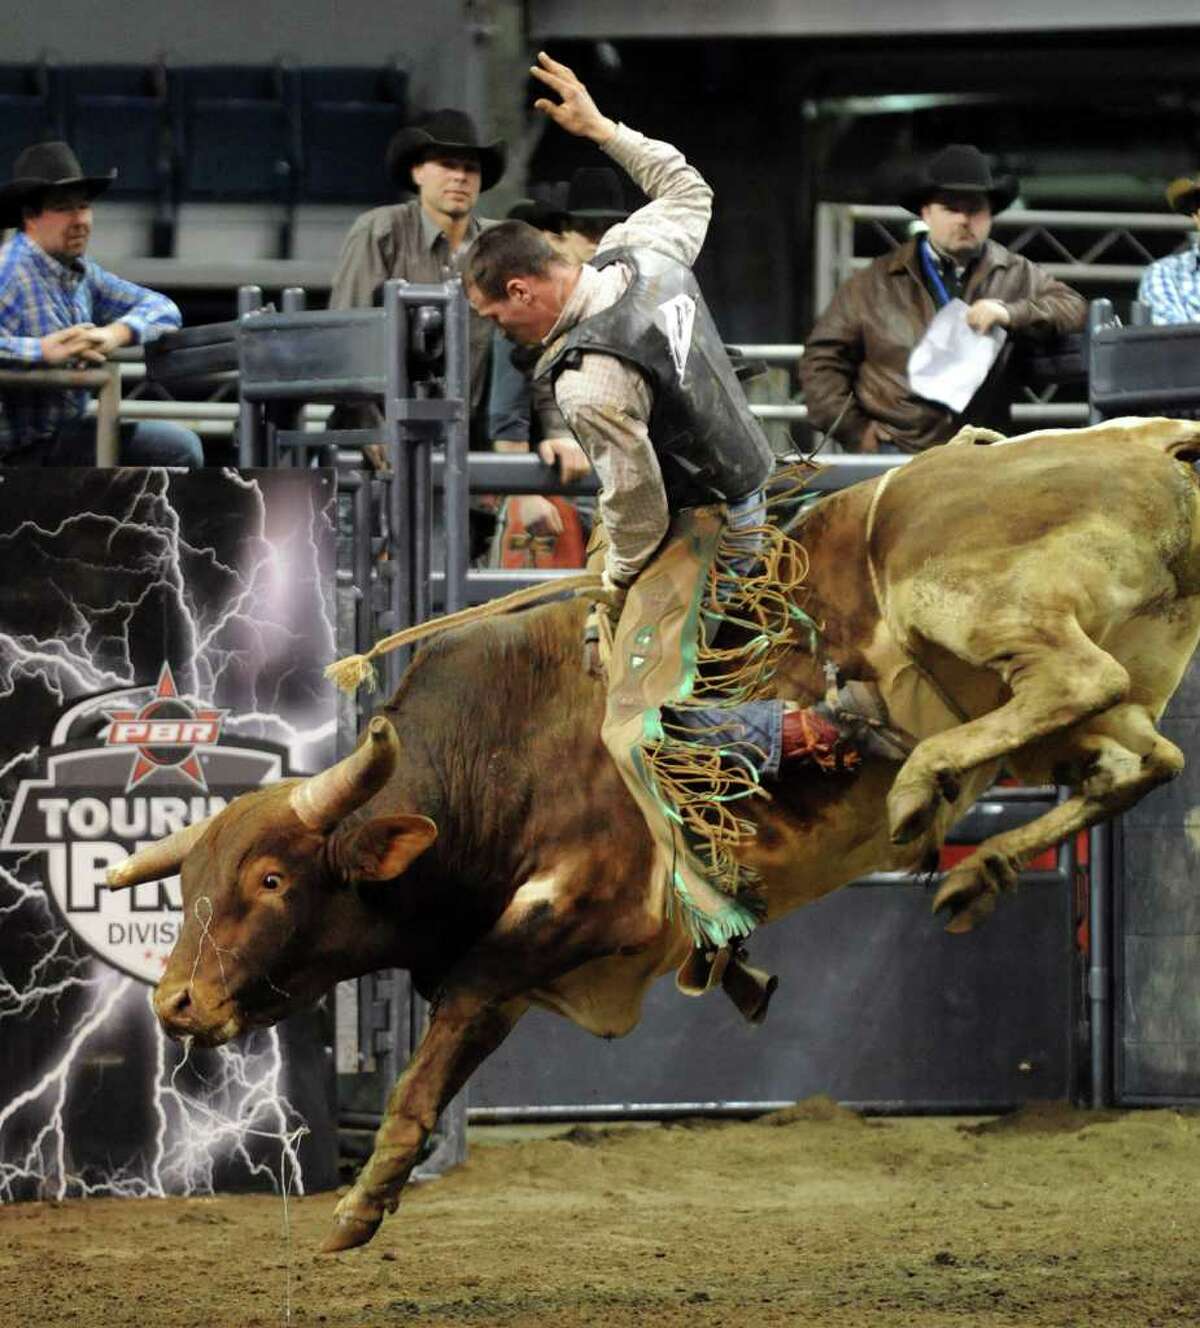 The Professional Bull Riders Touring Pro Division came to Webster Bank Arena at Harbor Yard in Bridgeport, Conn. for the Town Fair Tire Invitational on Friday January 21, 2011. Andrew Forcier, from Orange, rides True Gritt during the invitational.